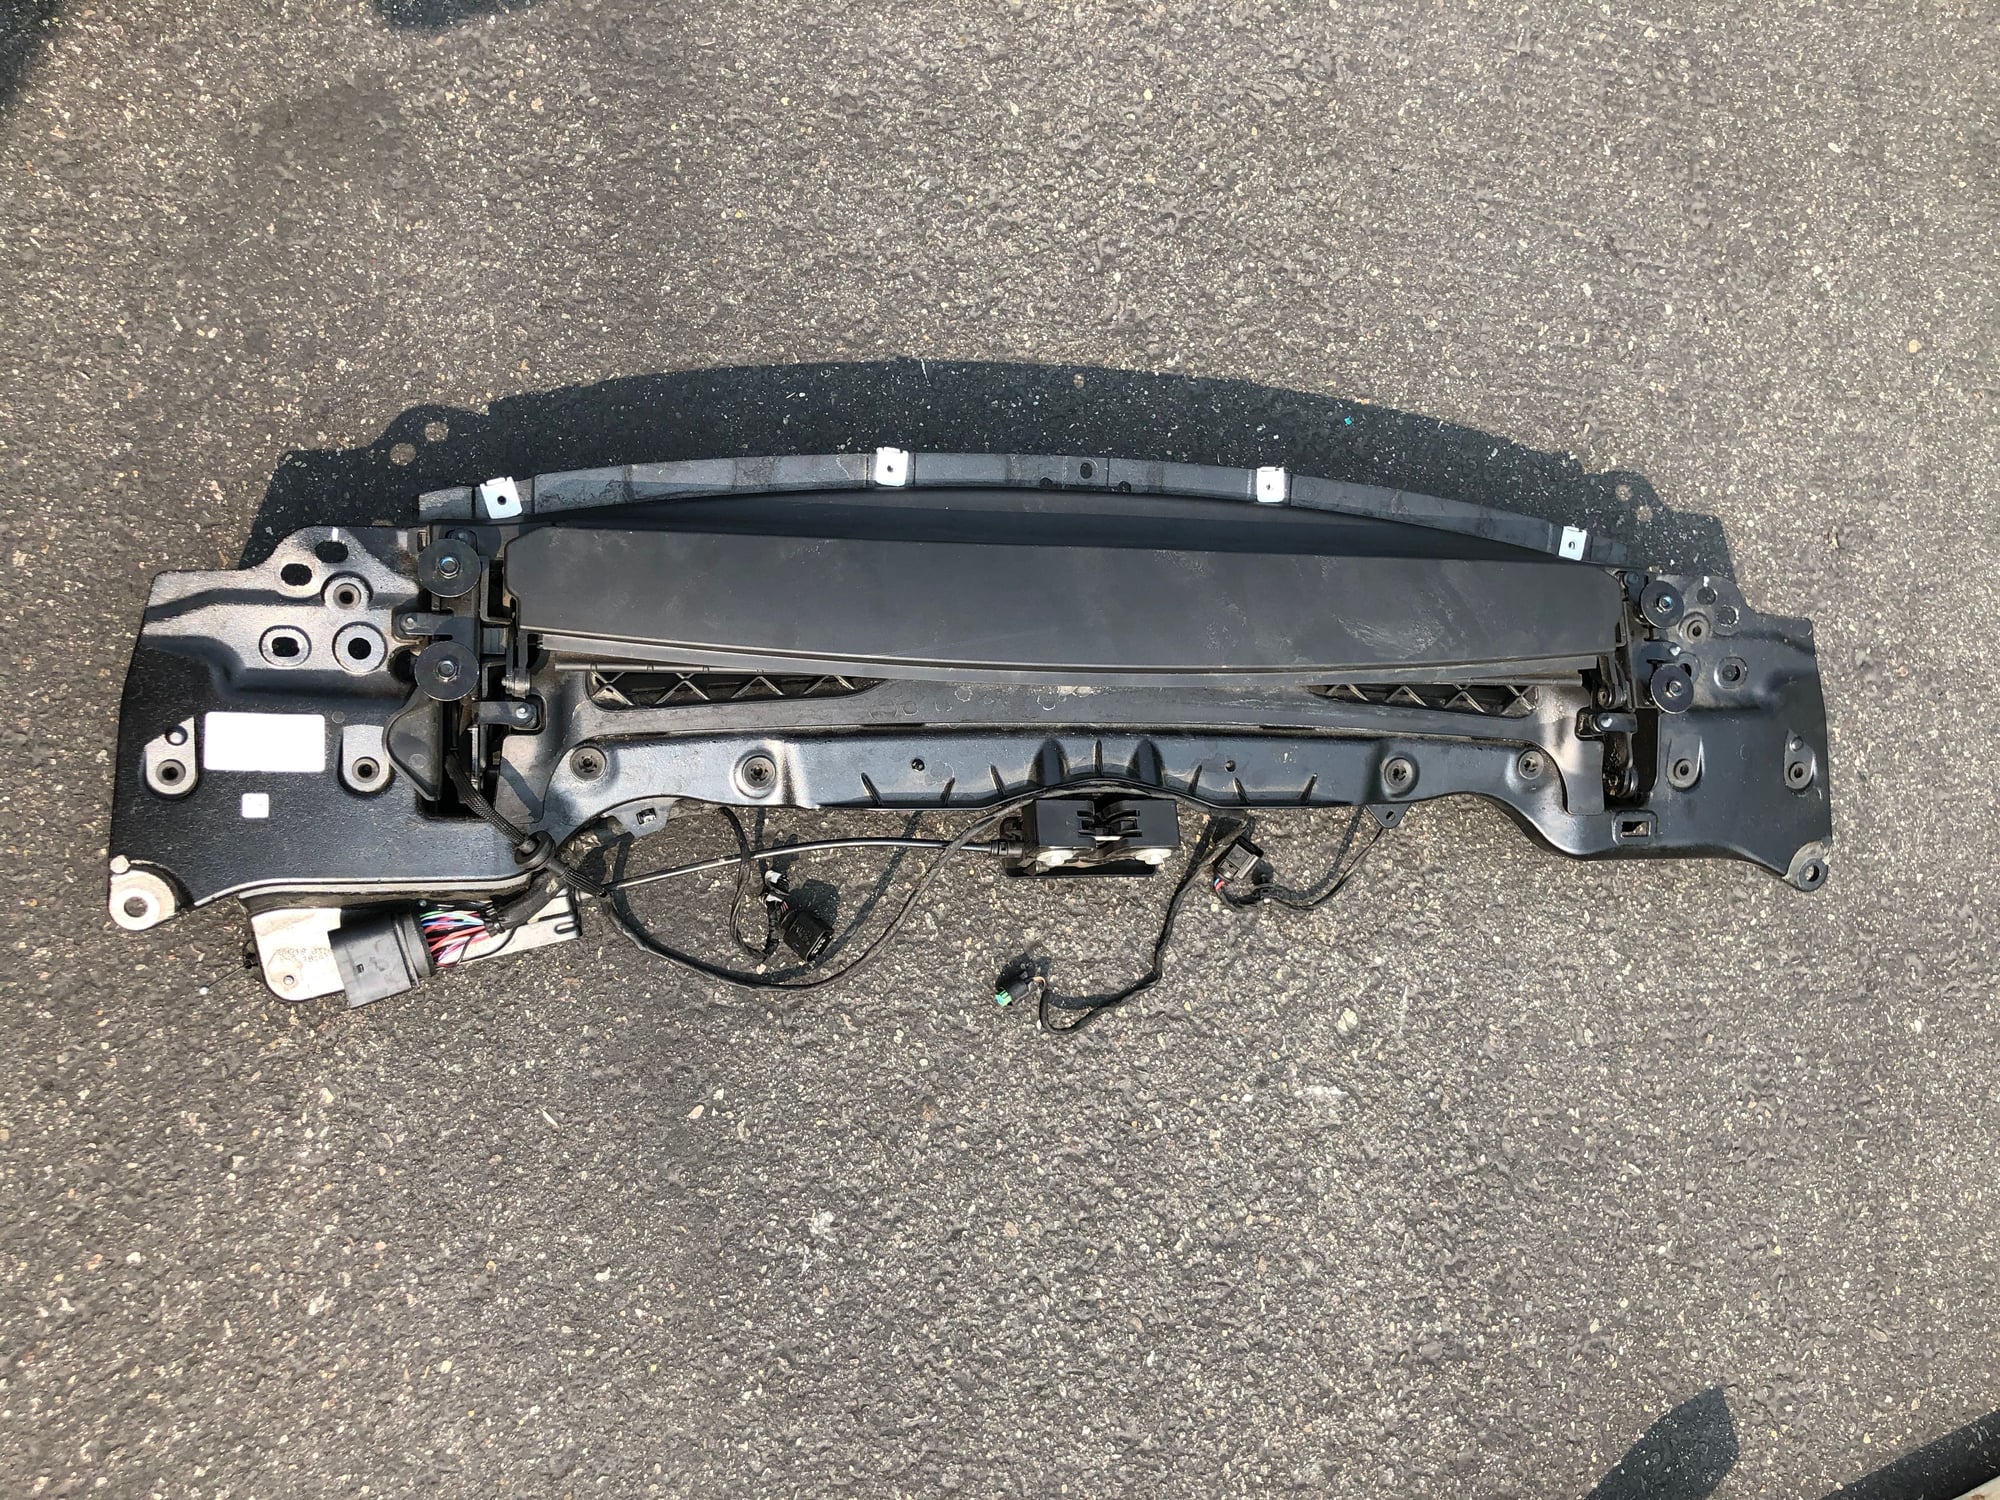 2018 Porsche GT3 - Touring spoiler hardware and fan - Exterior Body Parts - $1,500 - Irvine, CA 92620, United States